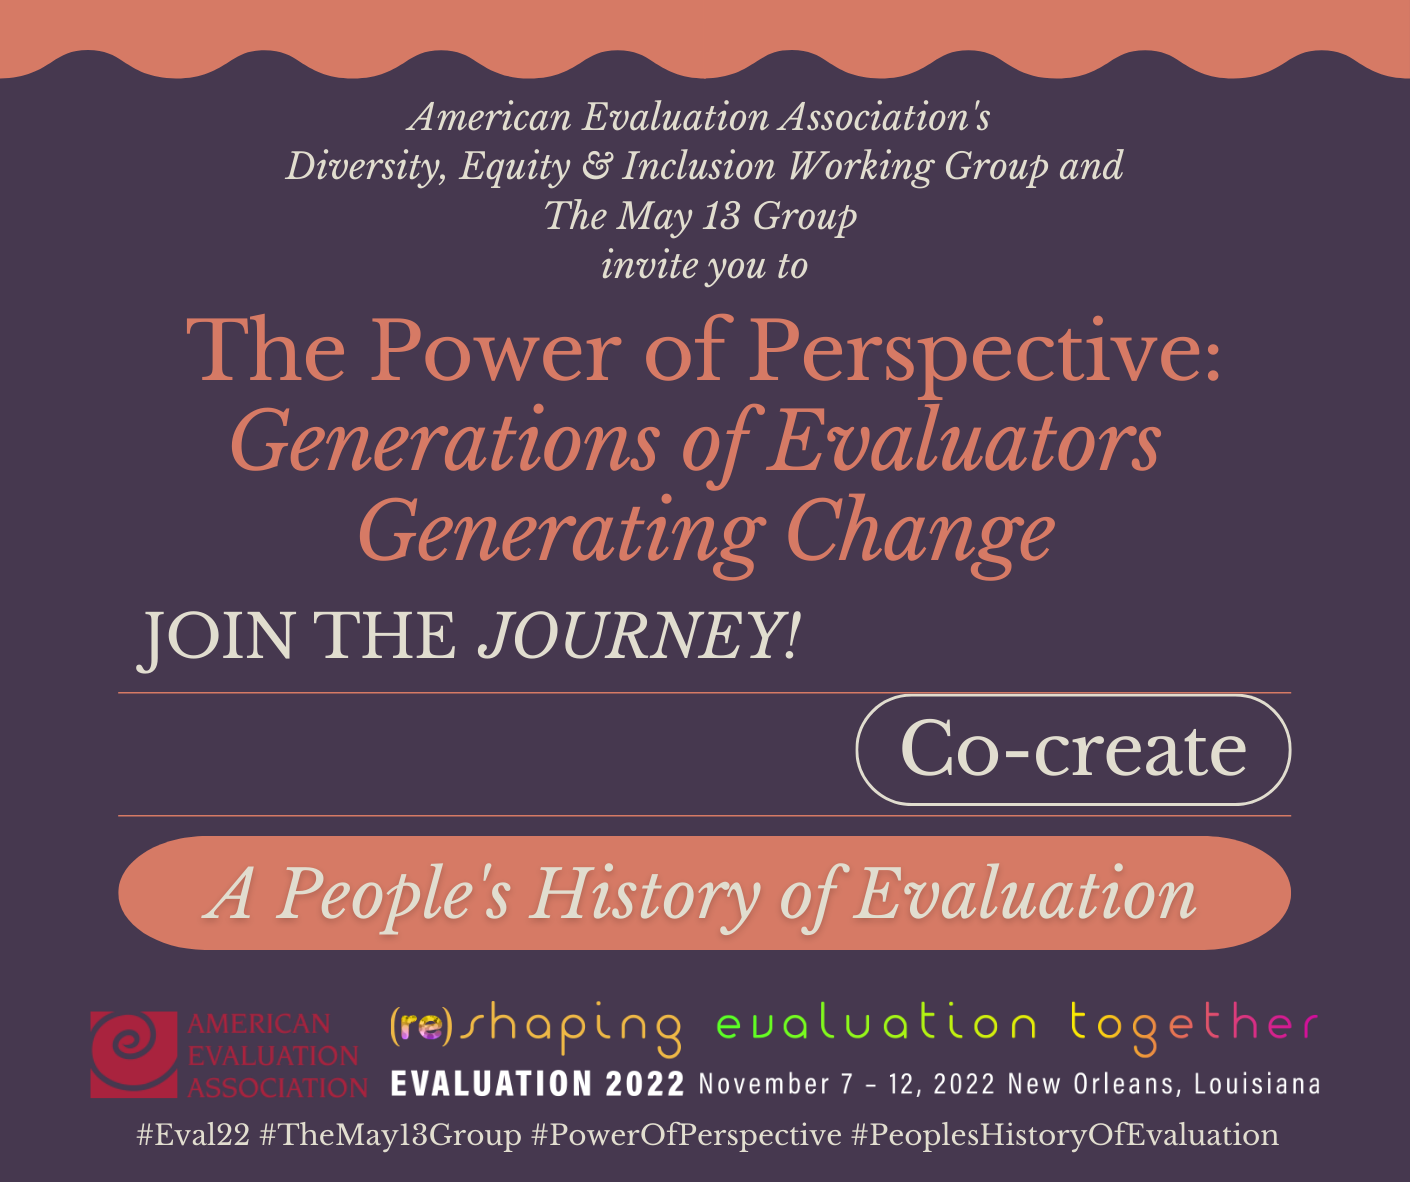 Advertisement for The Power of Perspective: Generations of Evaluators Generating Change